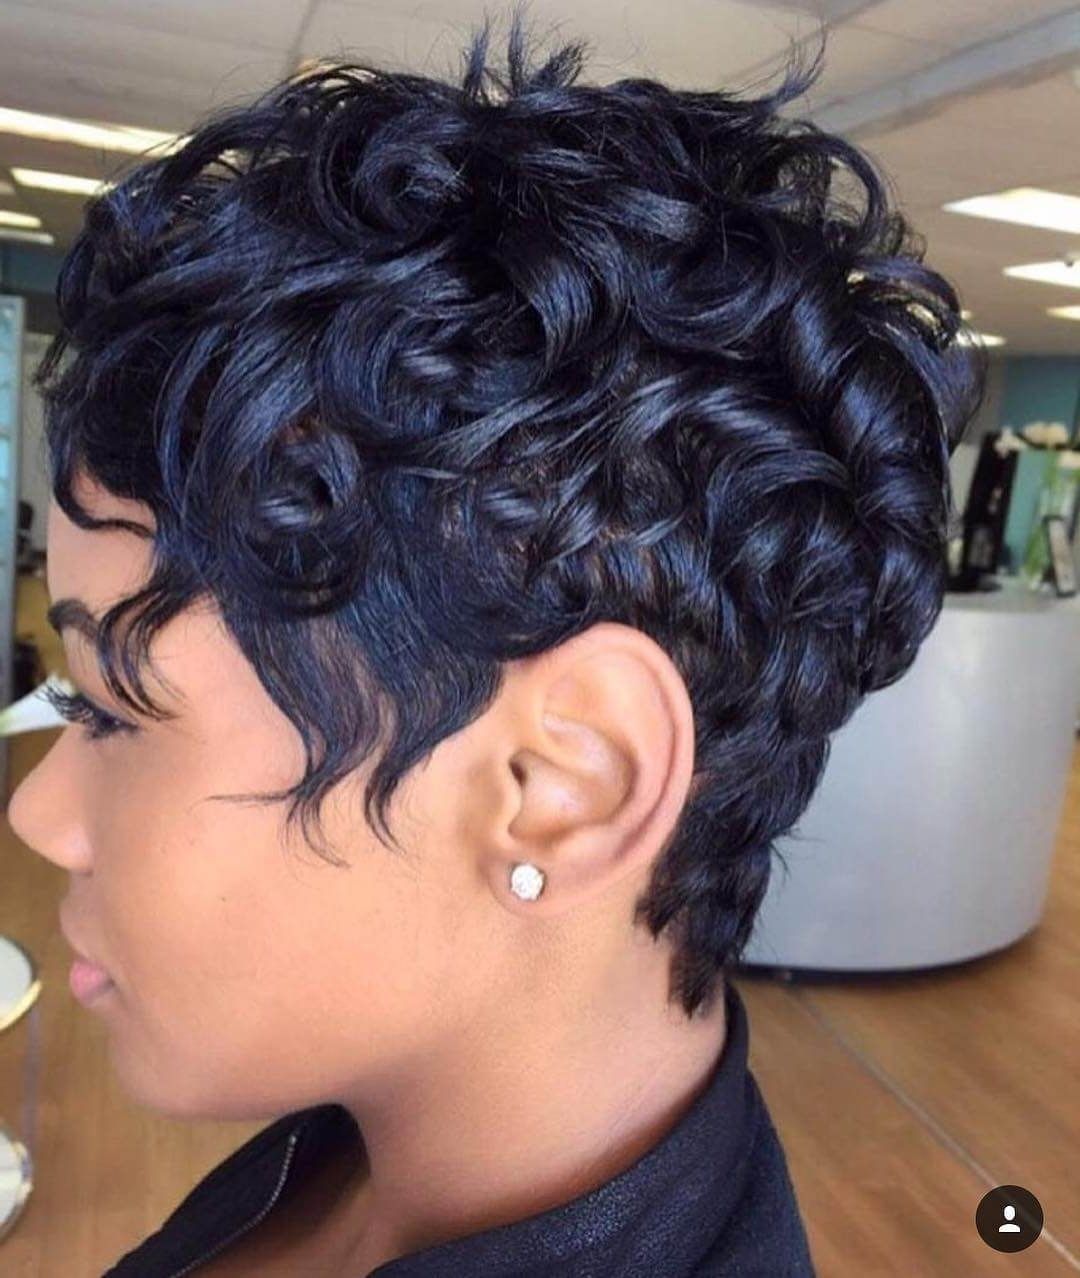 Famous Messy Tapered Pixie Hairstyles Within 12 Curly Pixie Cut For Short Or Medium Length Hair (View 19 of 20)